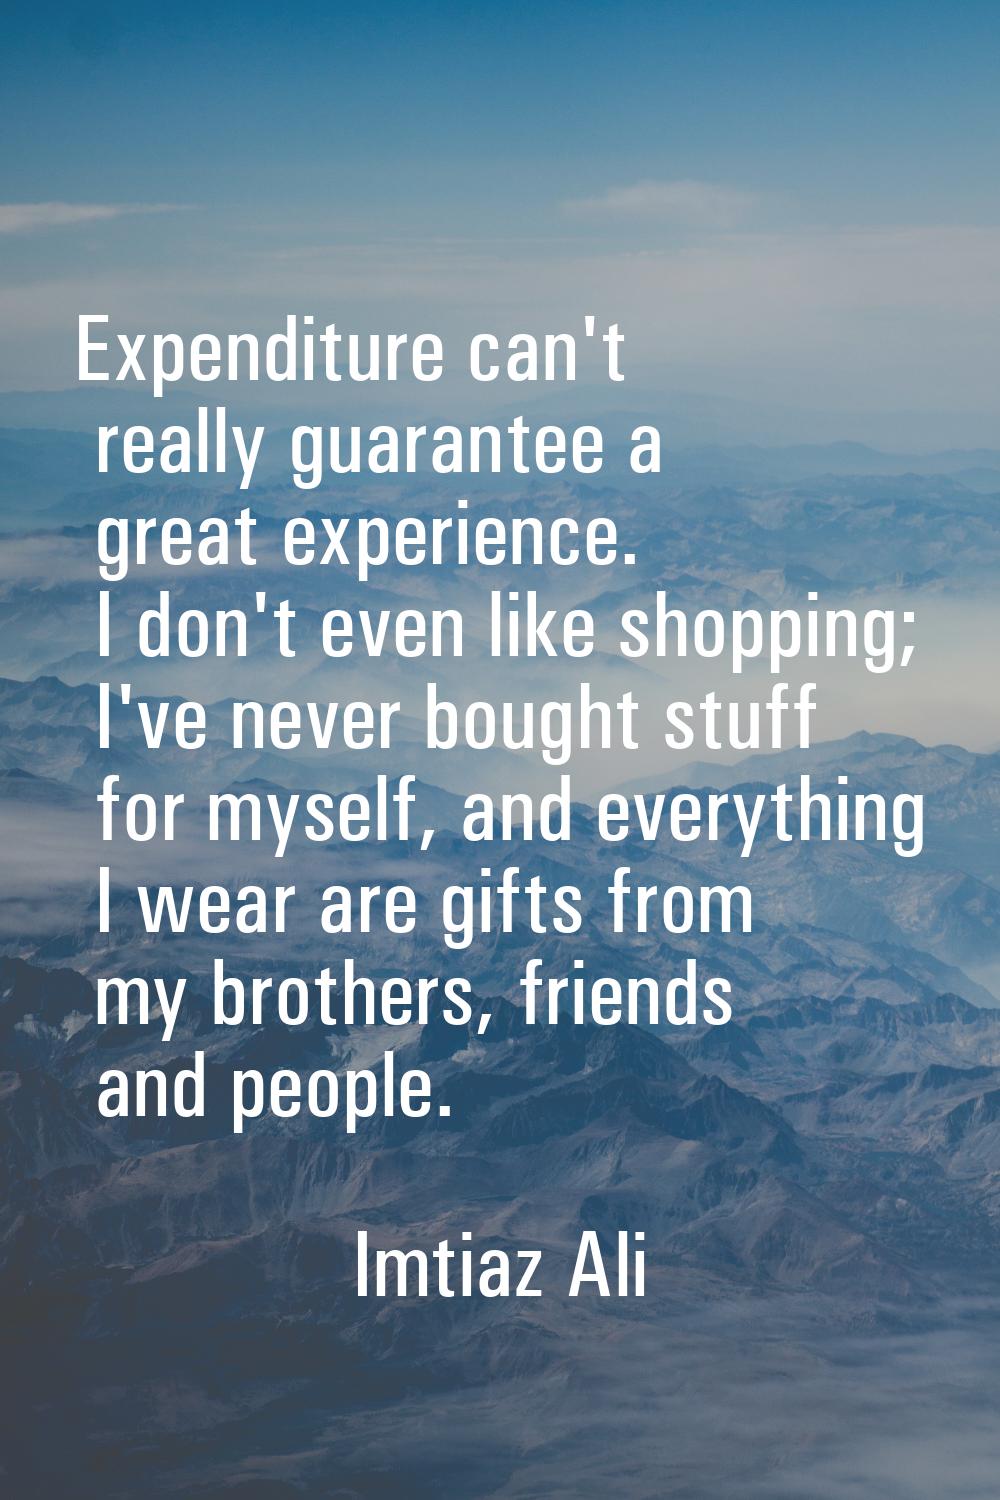 Expenditure can't really guarantee a great experience. I don't even like shopping; I've never bough